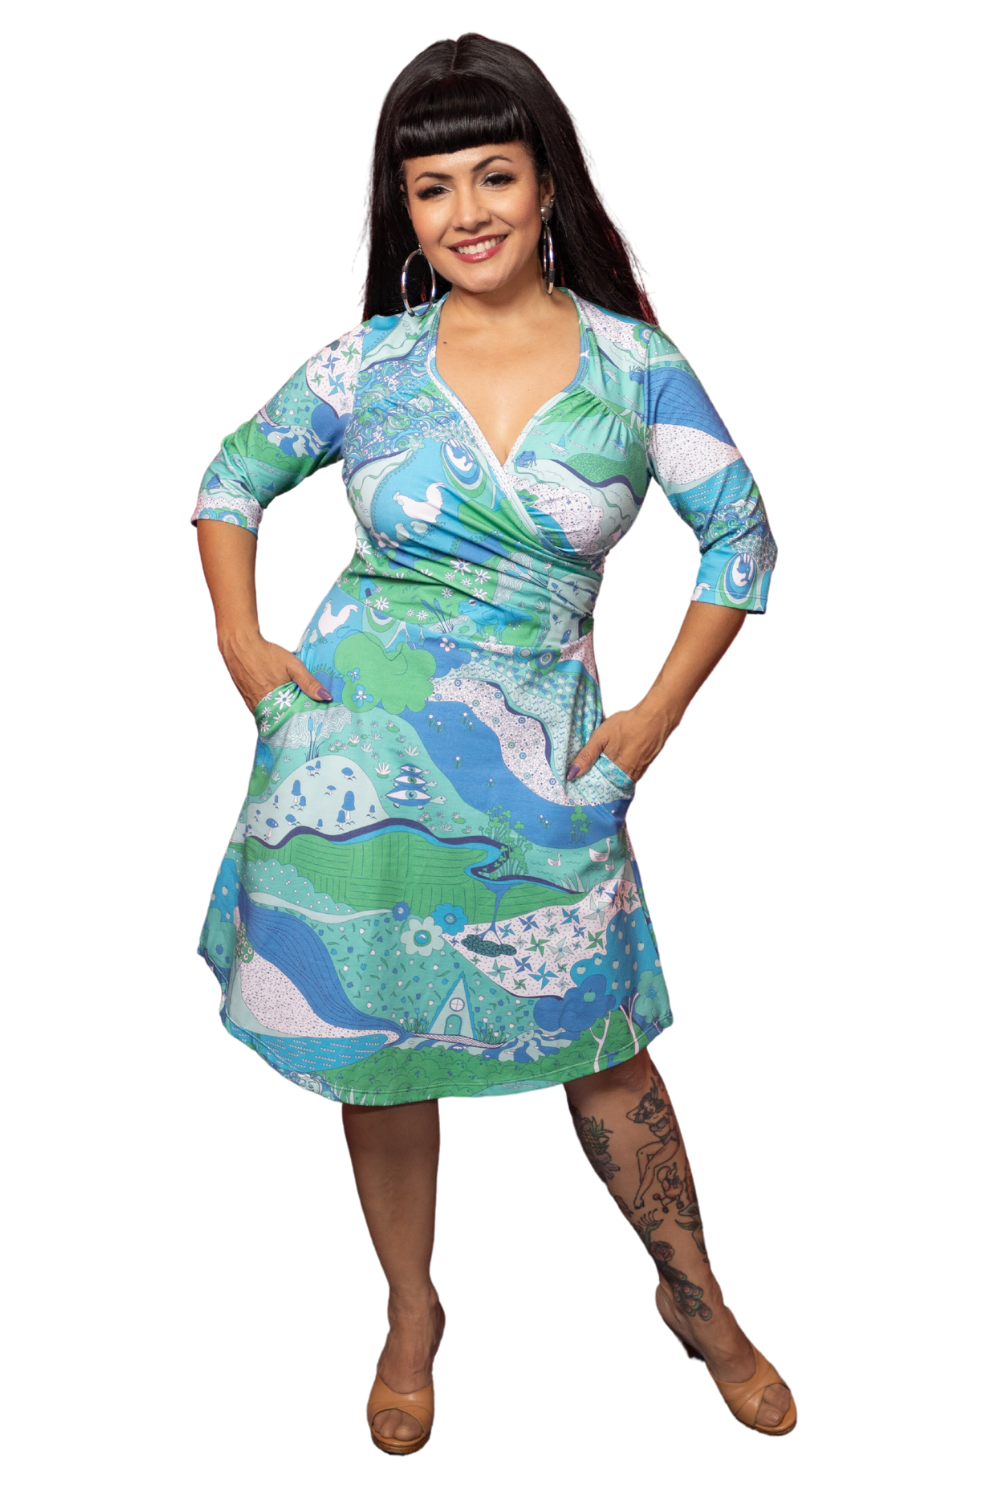 Cute black haired model in psychedelic wrap dress in shades of blue and green